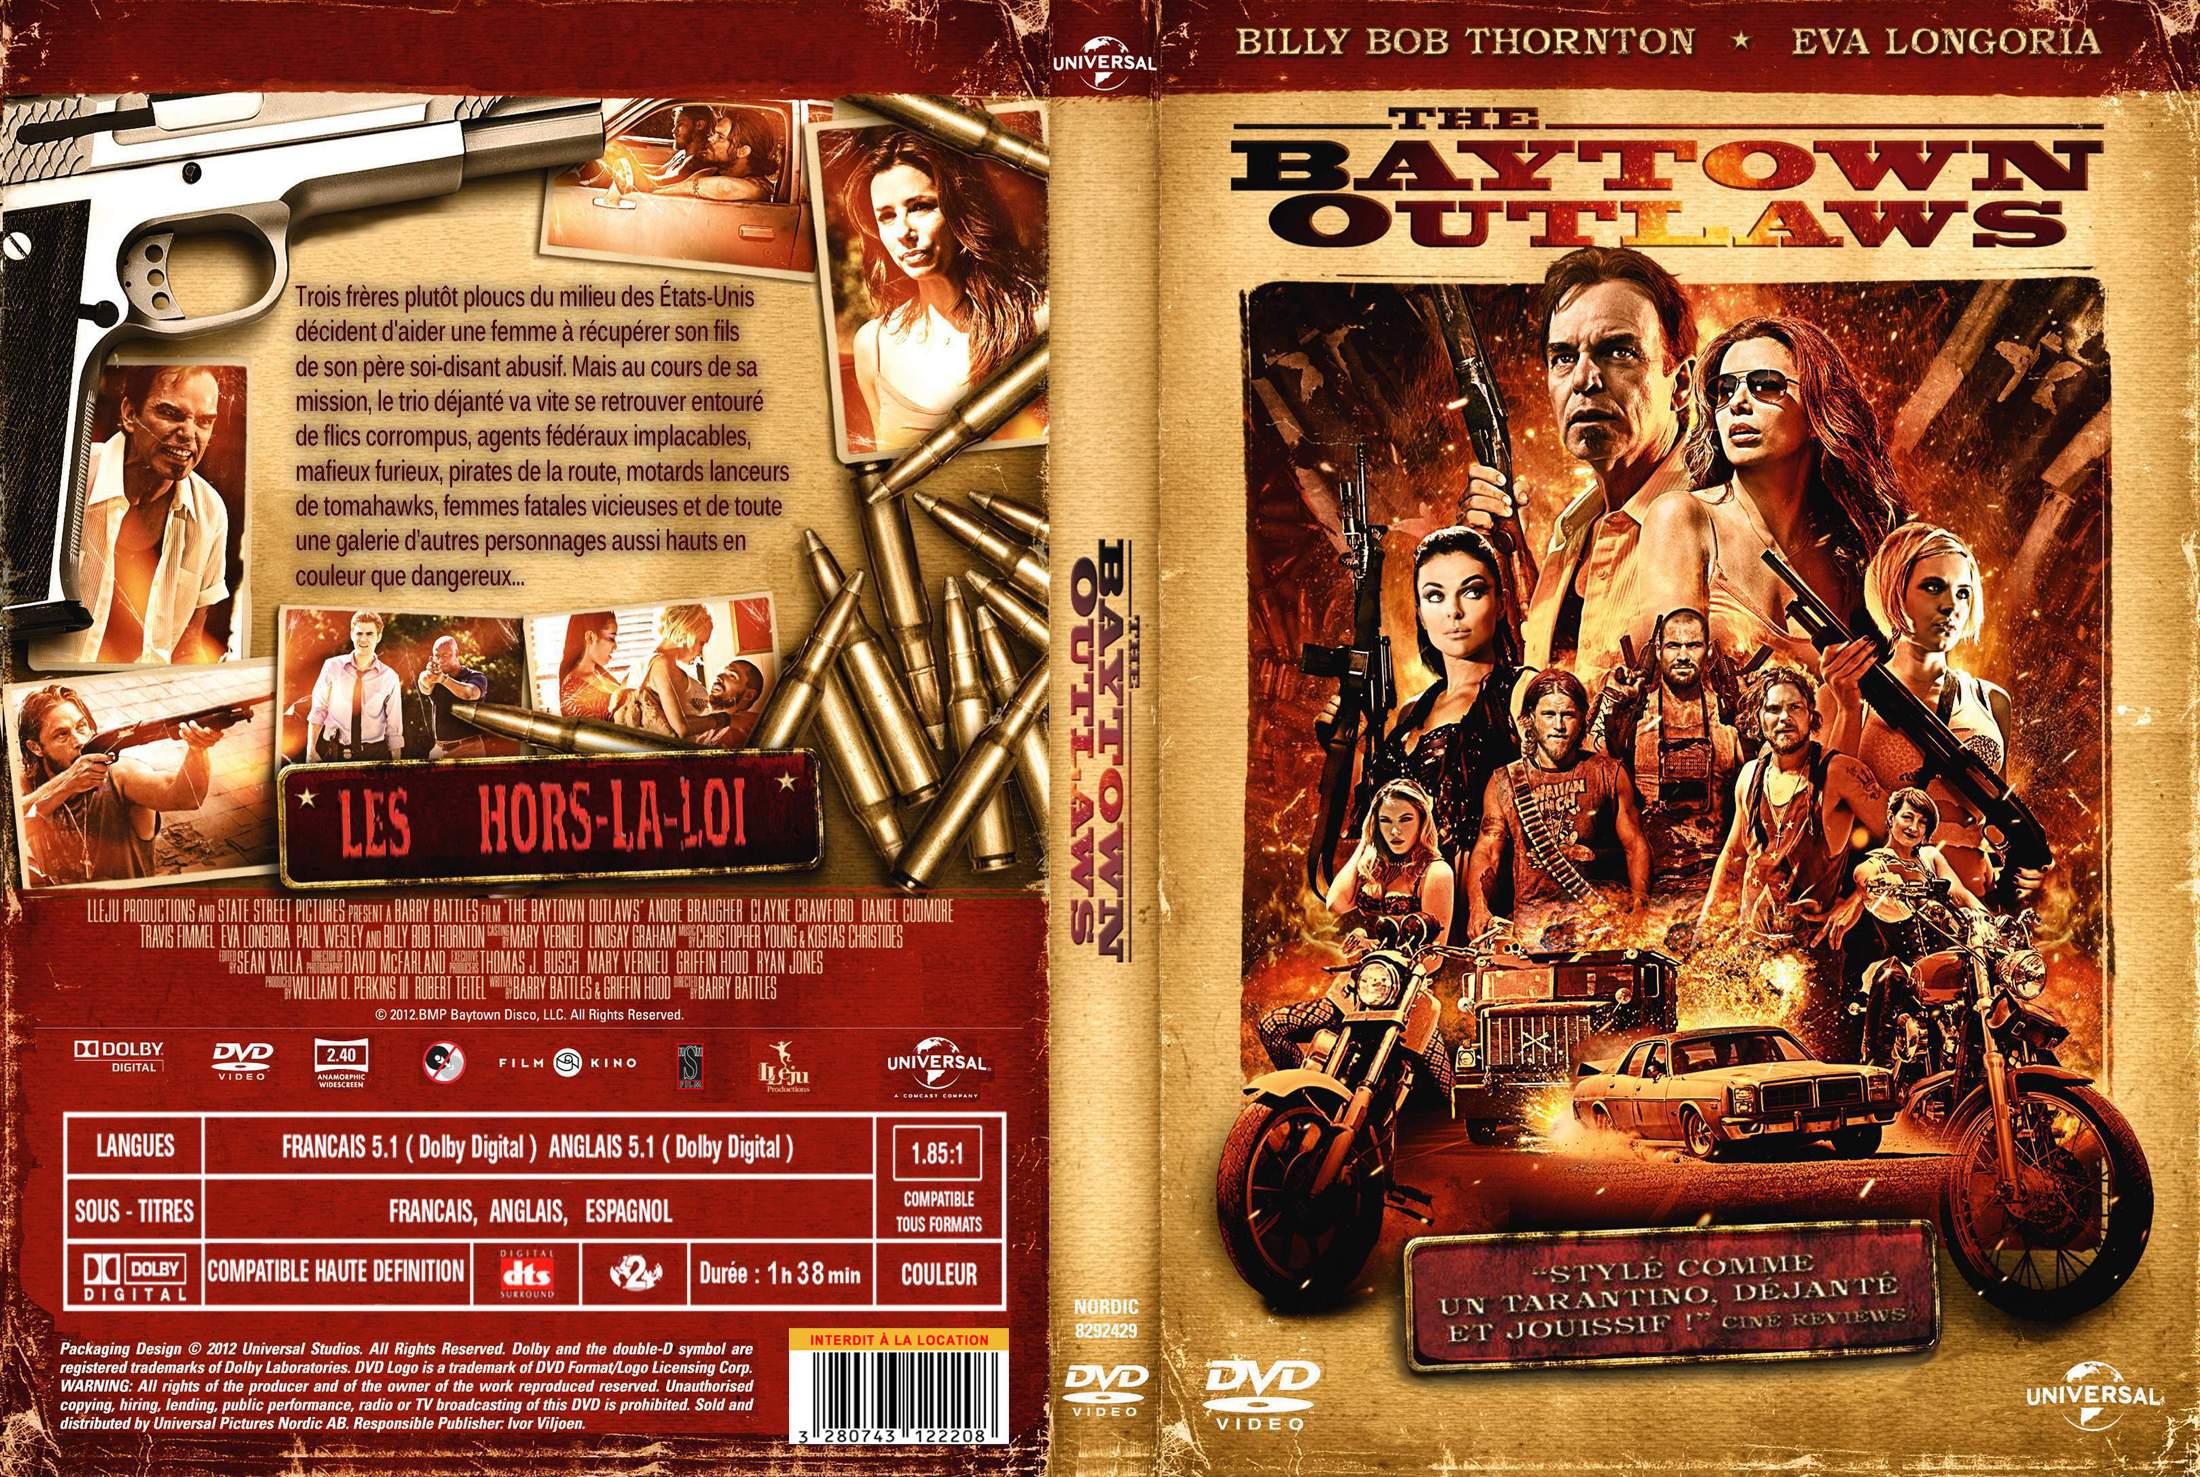 Jaquette DVD The Baytown Outlaws custom